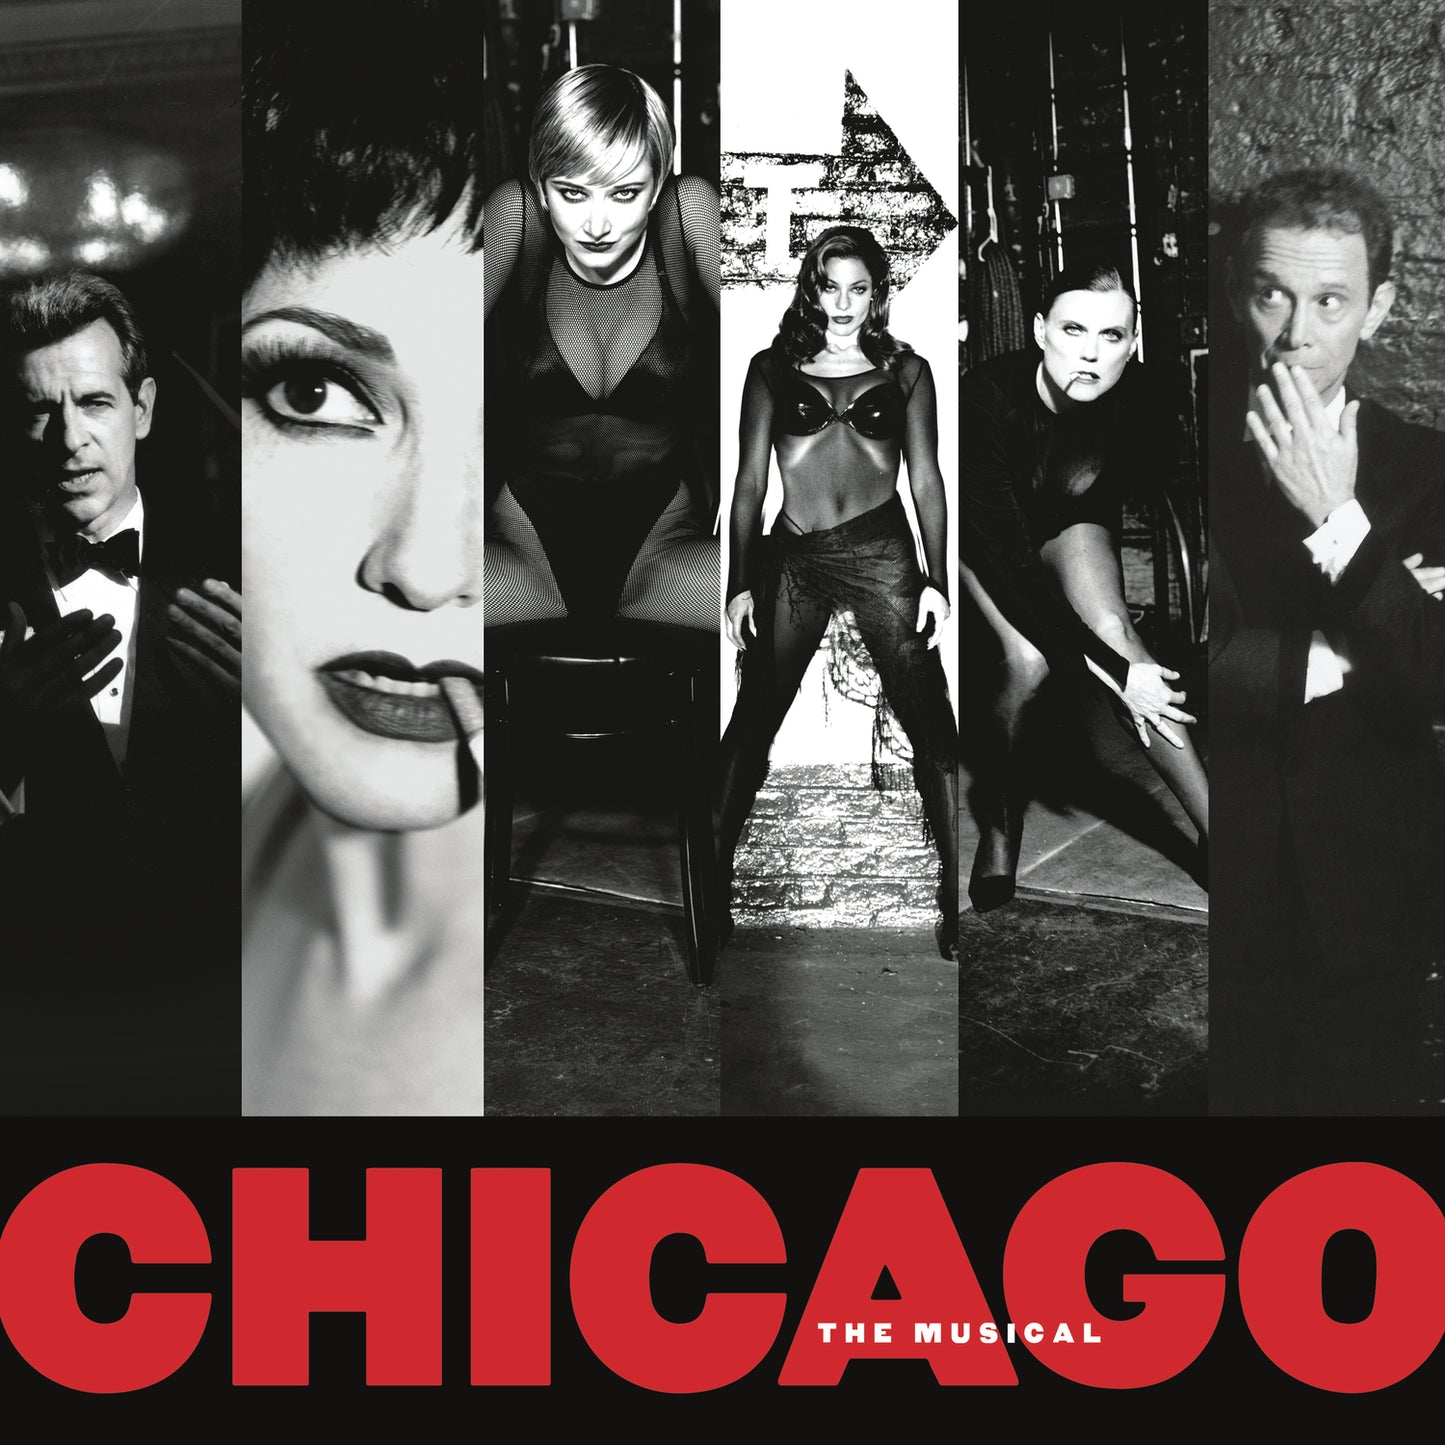 CHICAGO THE MUSICAL (1997 NEW BROADWAY CAST RECORDING)